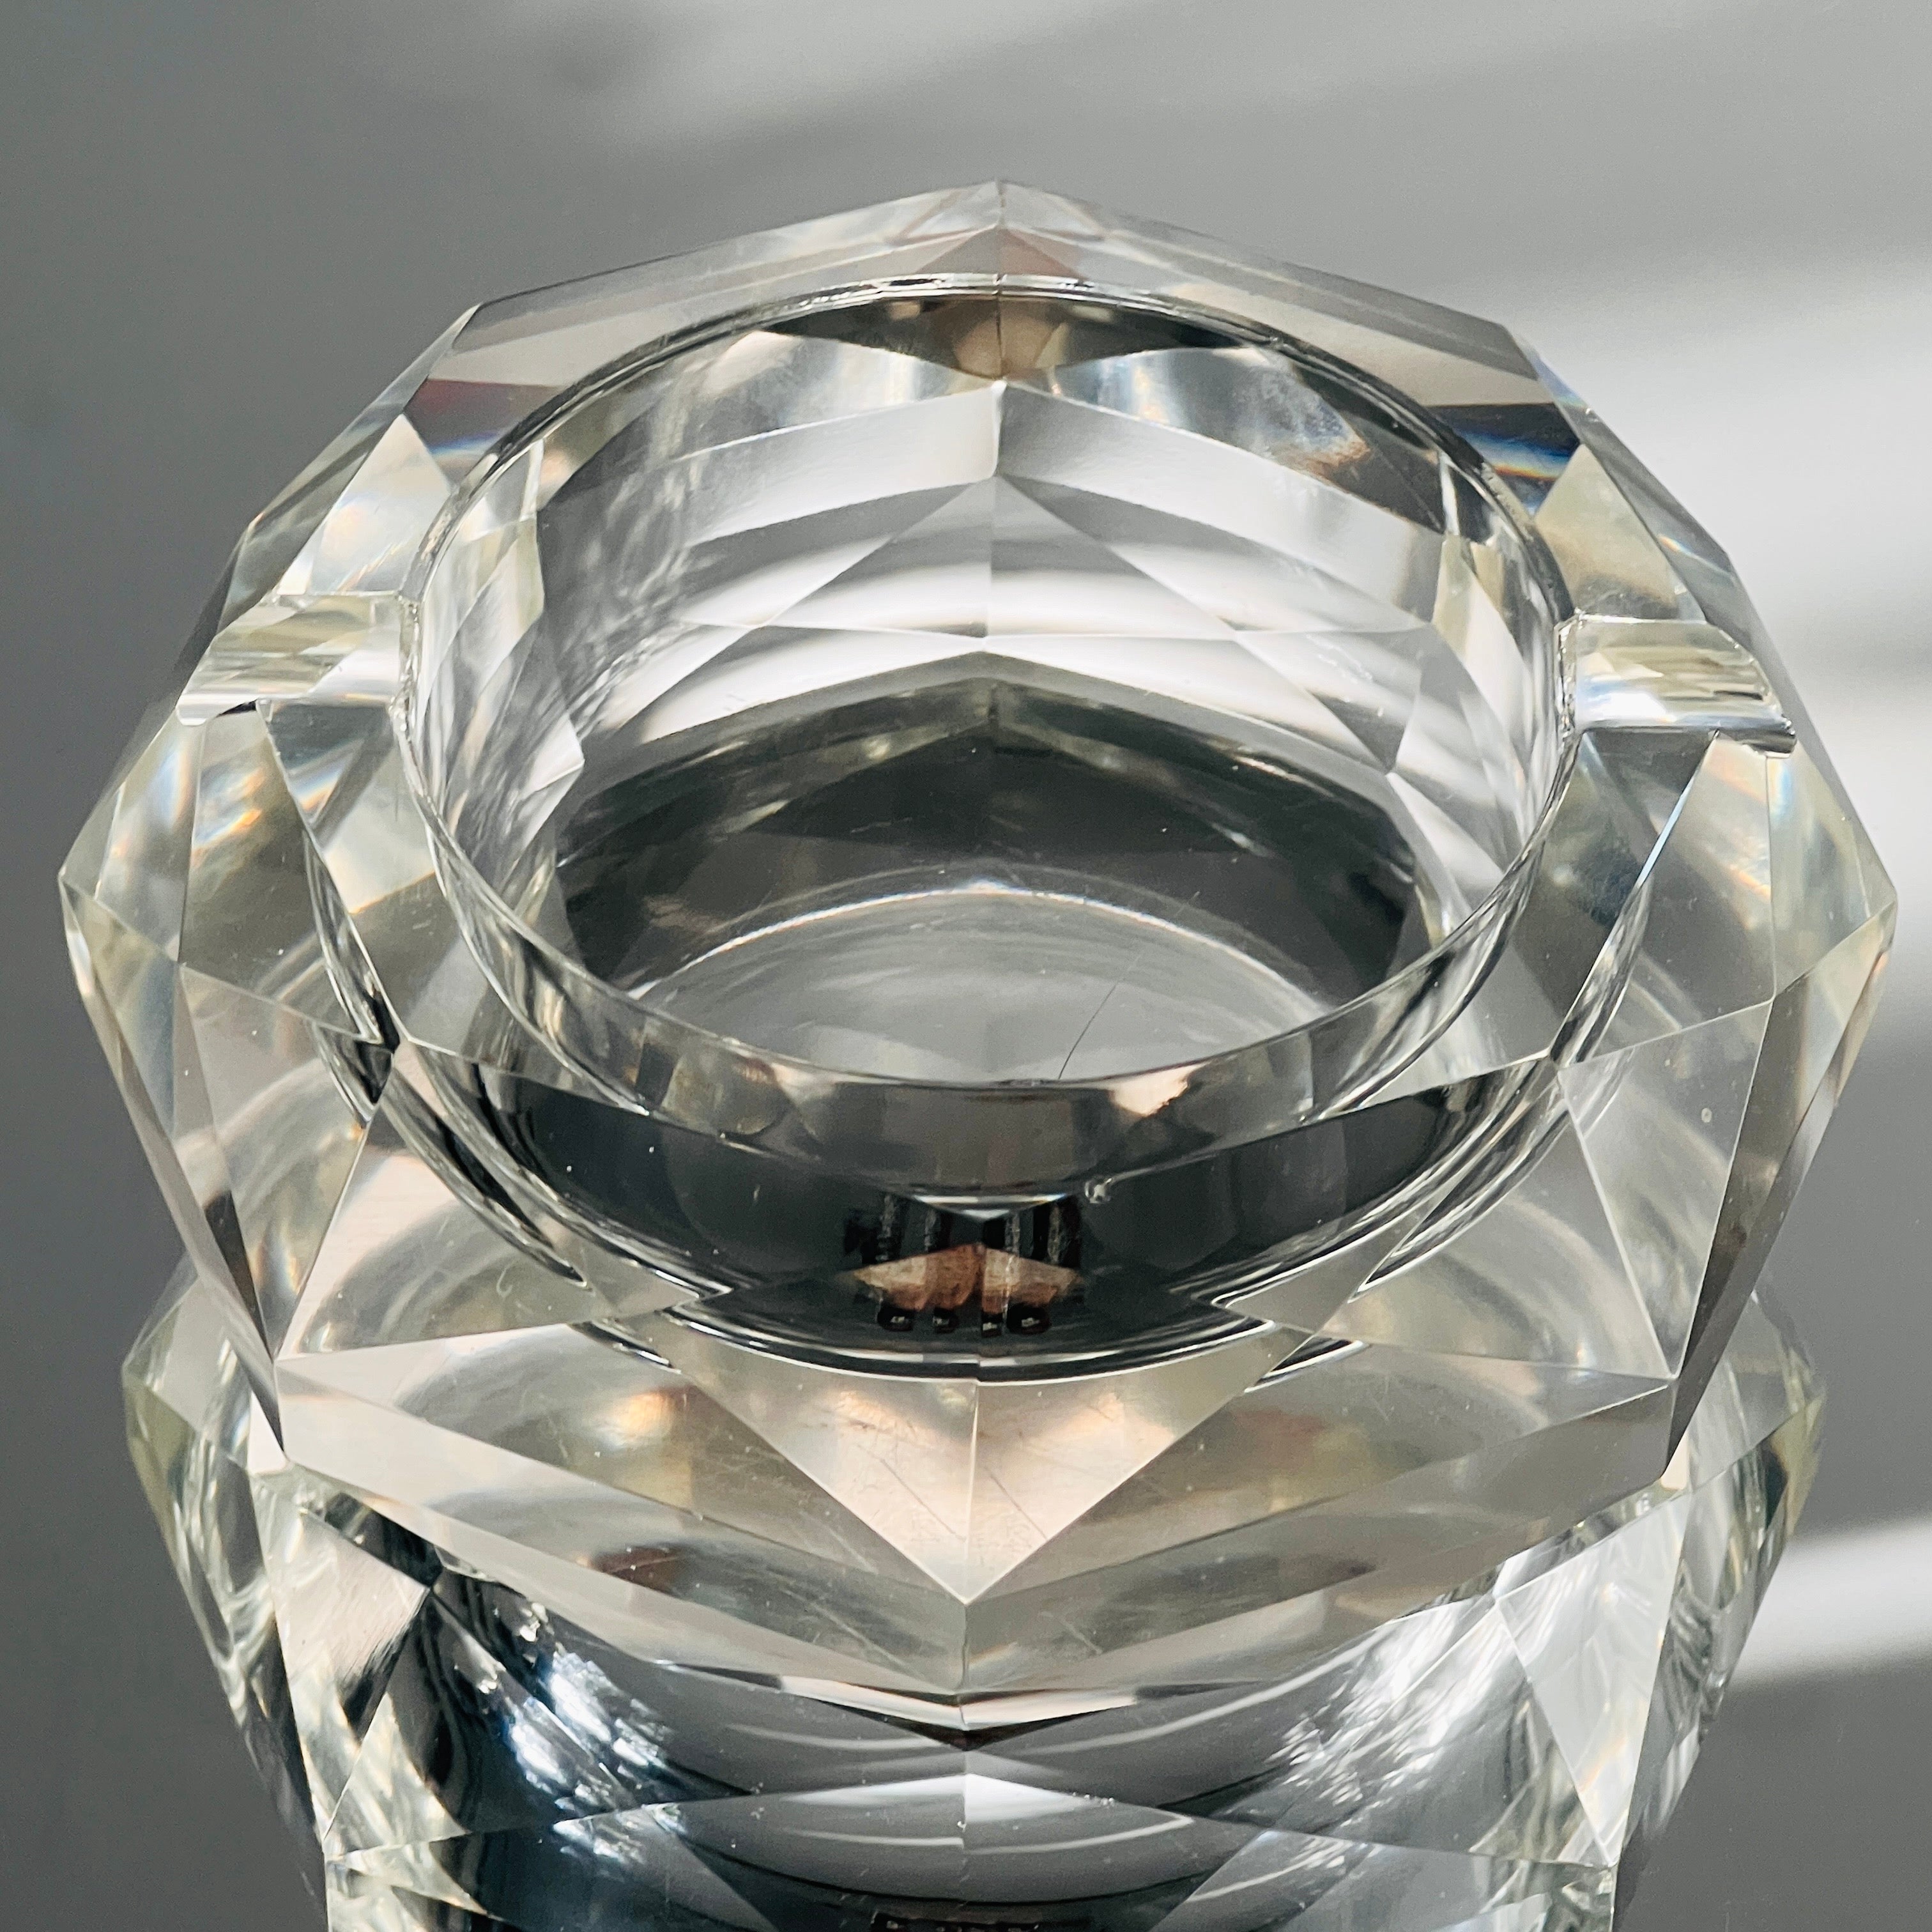 Mid-Century Modern cut crystal ashtray with faceted design. The ashtray is predominantly round in form but has eight sides creating prisms of light. Heavy in weight and fitted with two cigarette notches. Can be used as decorative object. Makes a